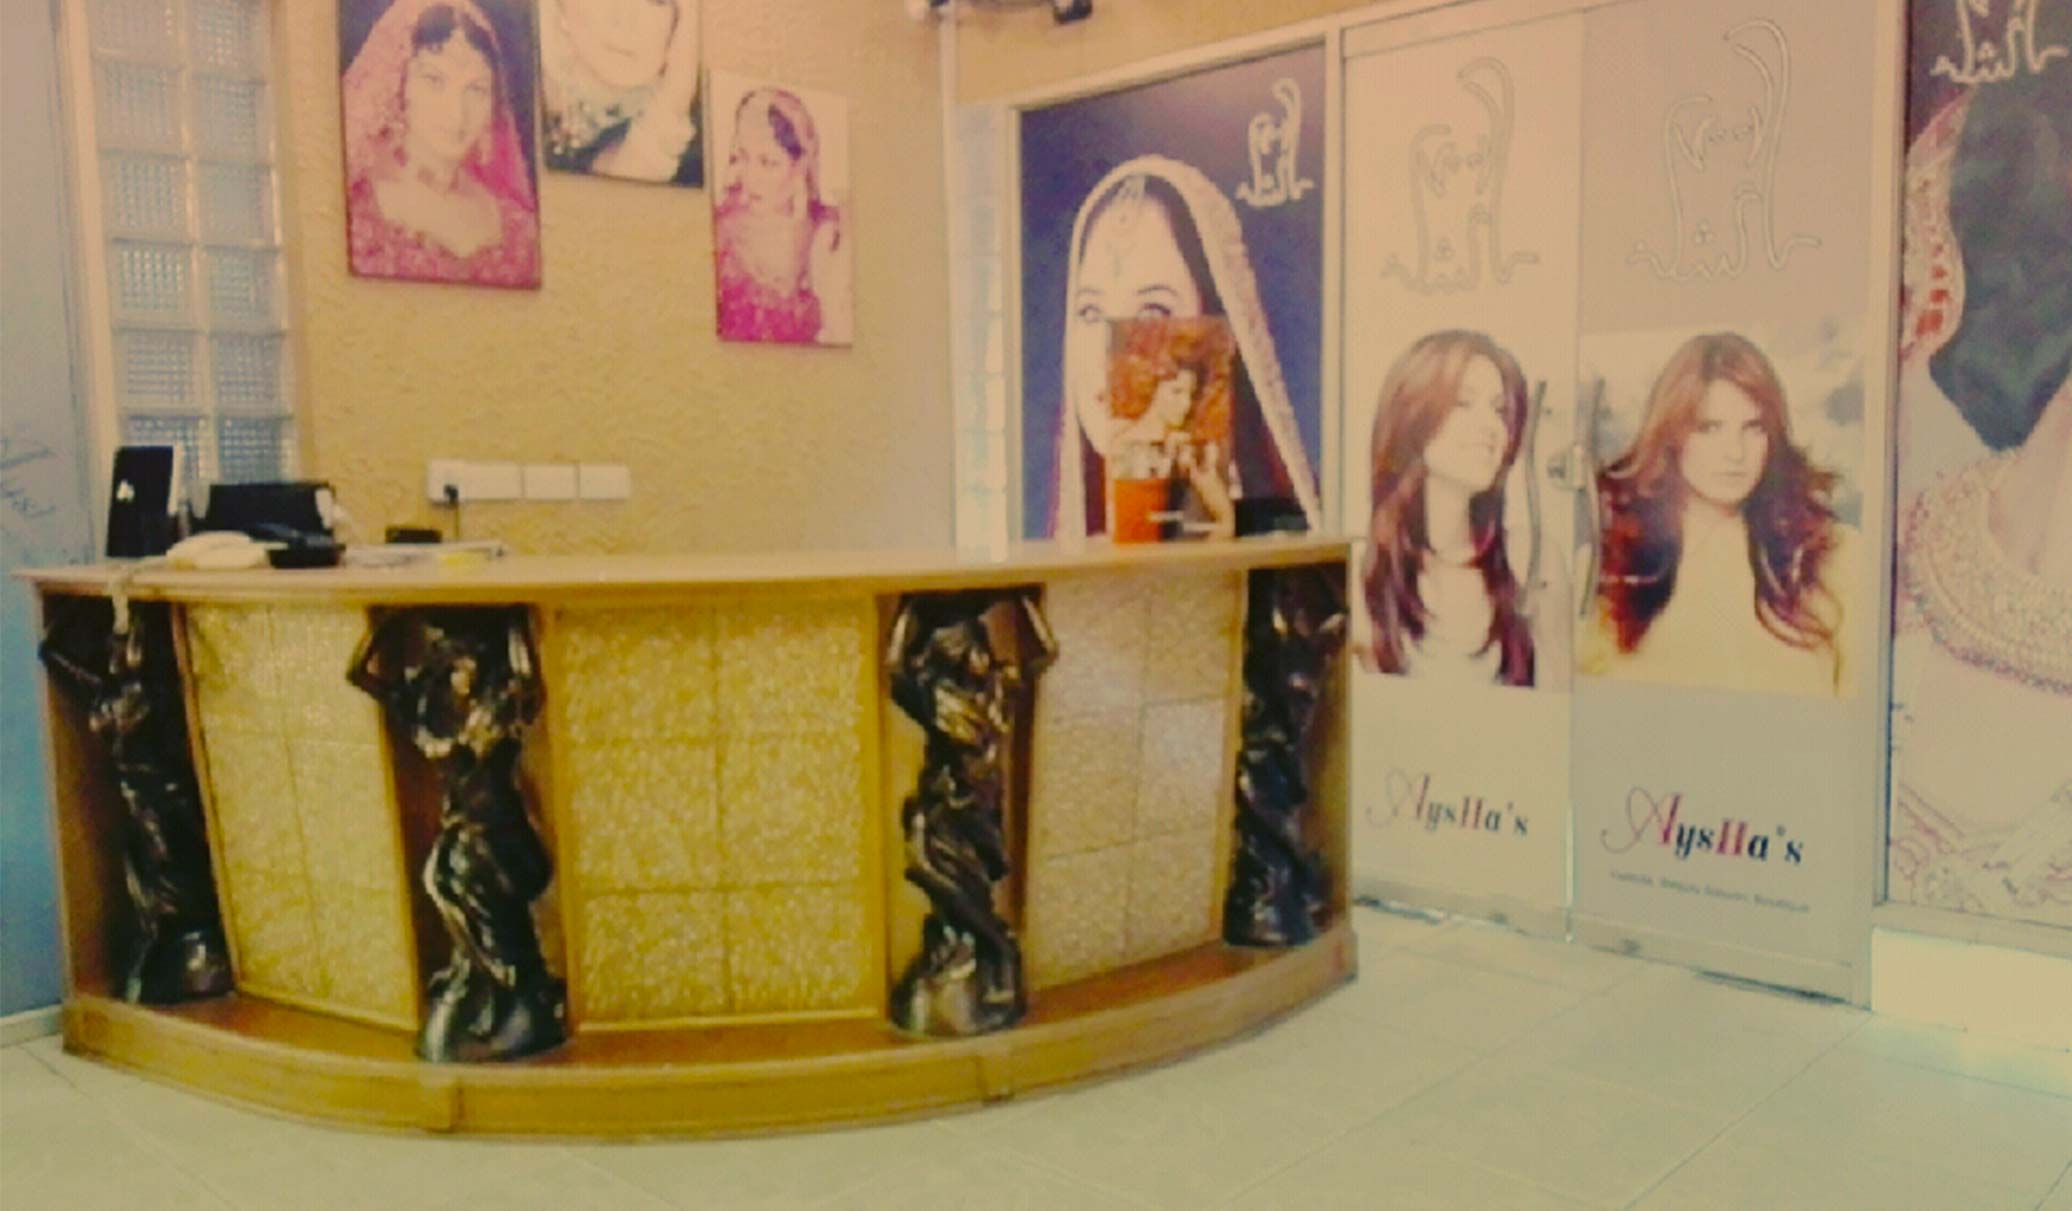 Ayesha's Salon Offers: 86% off, Rs 1199 only for Whitening Facial + Haircut + Hair Shampoo + Whitening Manicure + Whitening Pedicure + Shoulders Massage + Eyebrows & Upper Lip Threading at Ayesha's Salon & Spa Garden Town Lahore.